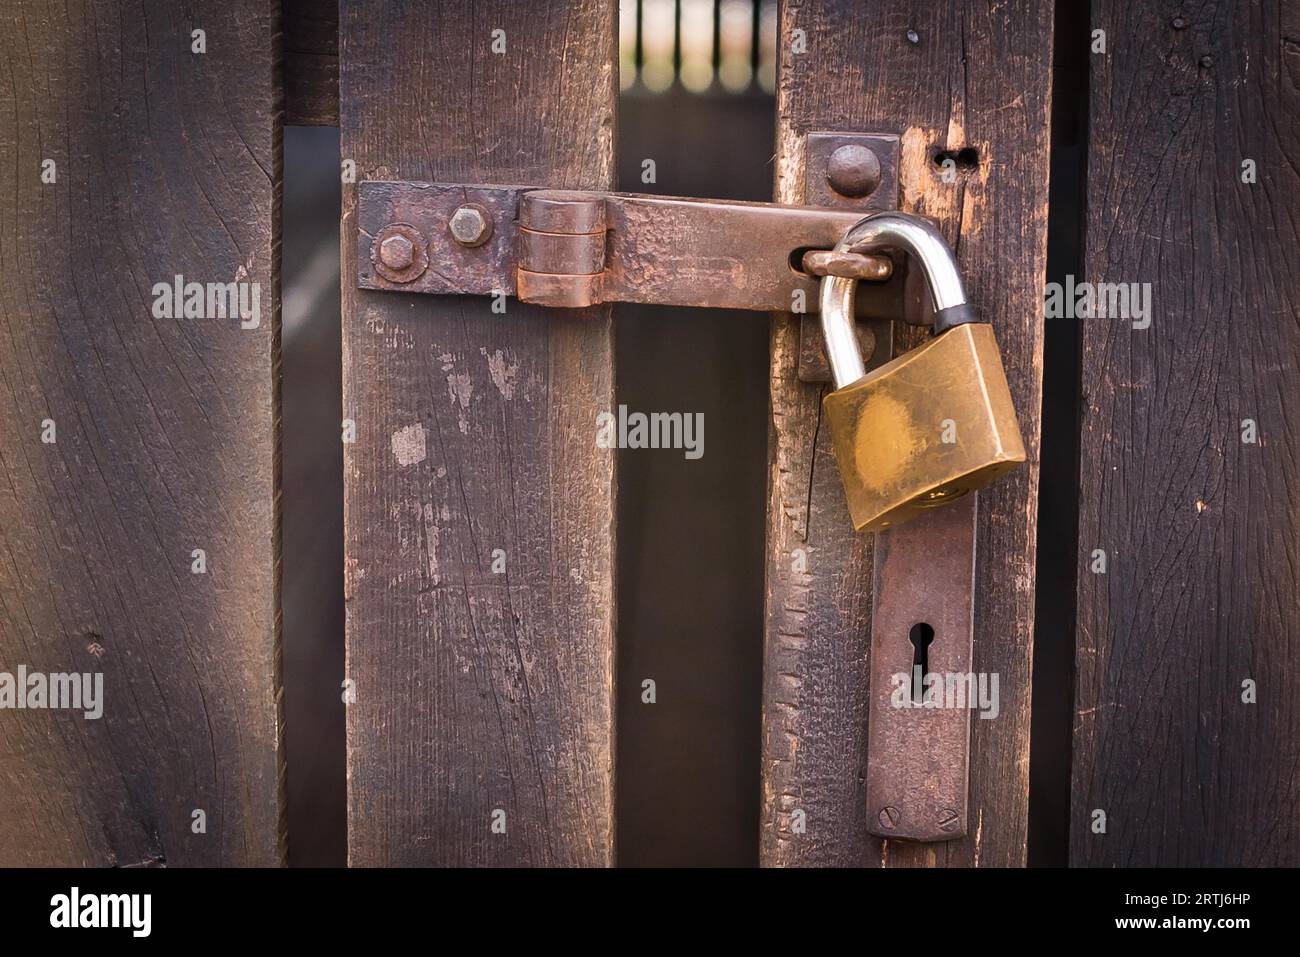 Close up view of a padlock with an old metal hasp and staple on an old wooden door Stock Photo